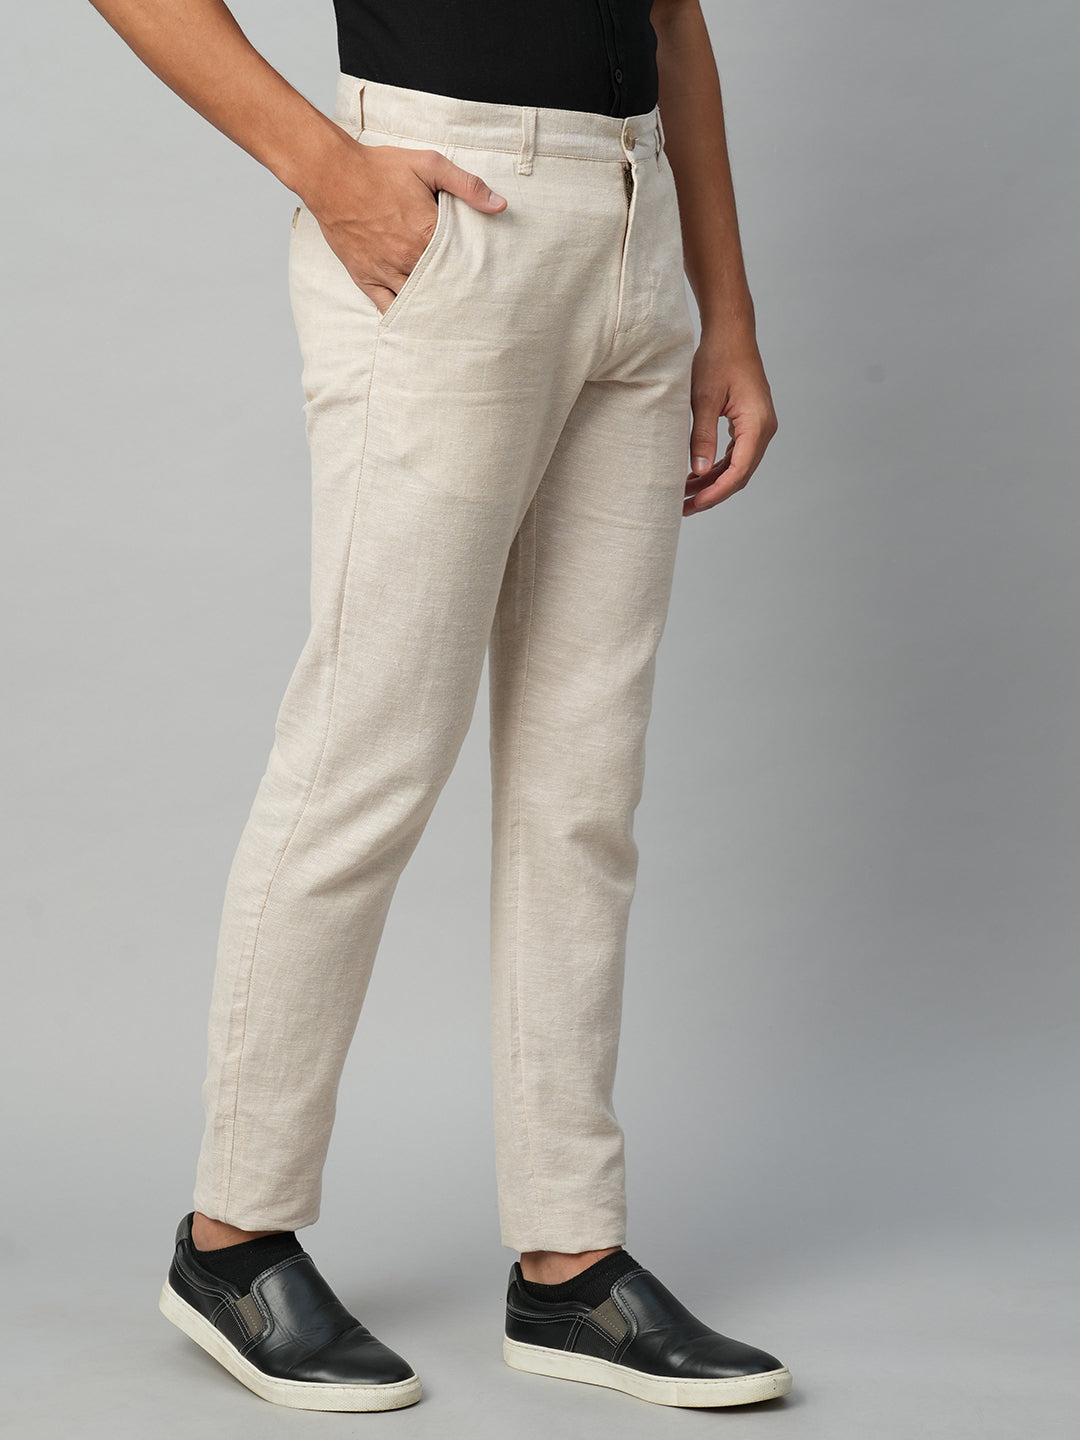 Auckland Natural Tapered Linen Pants  Isona Linen